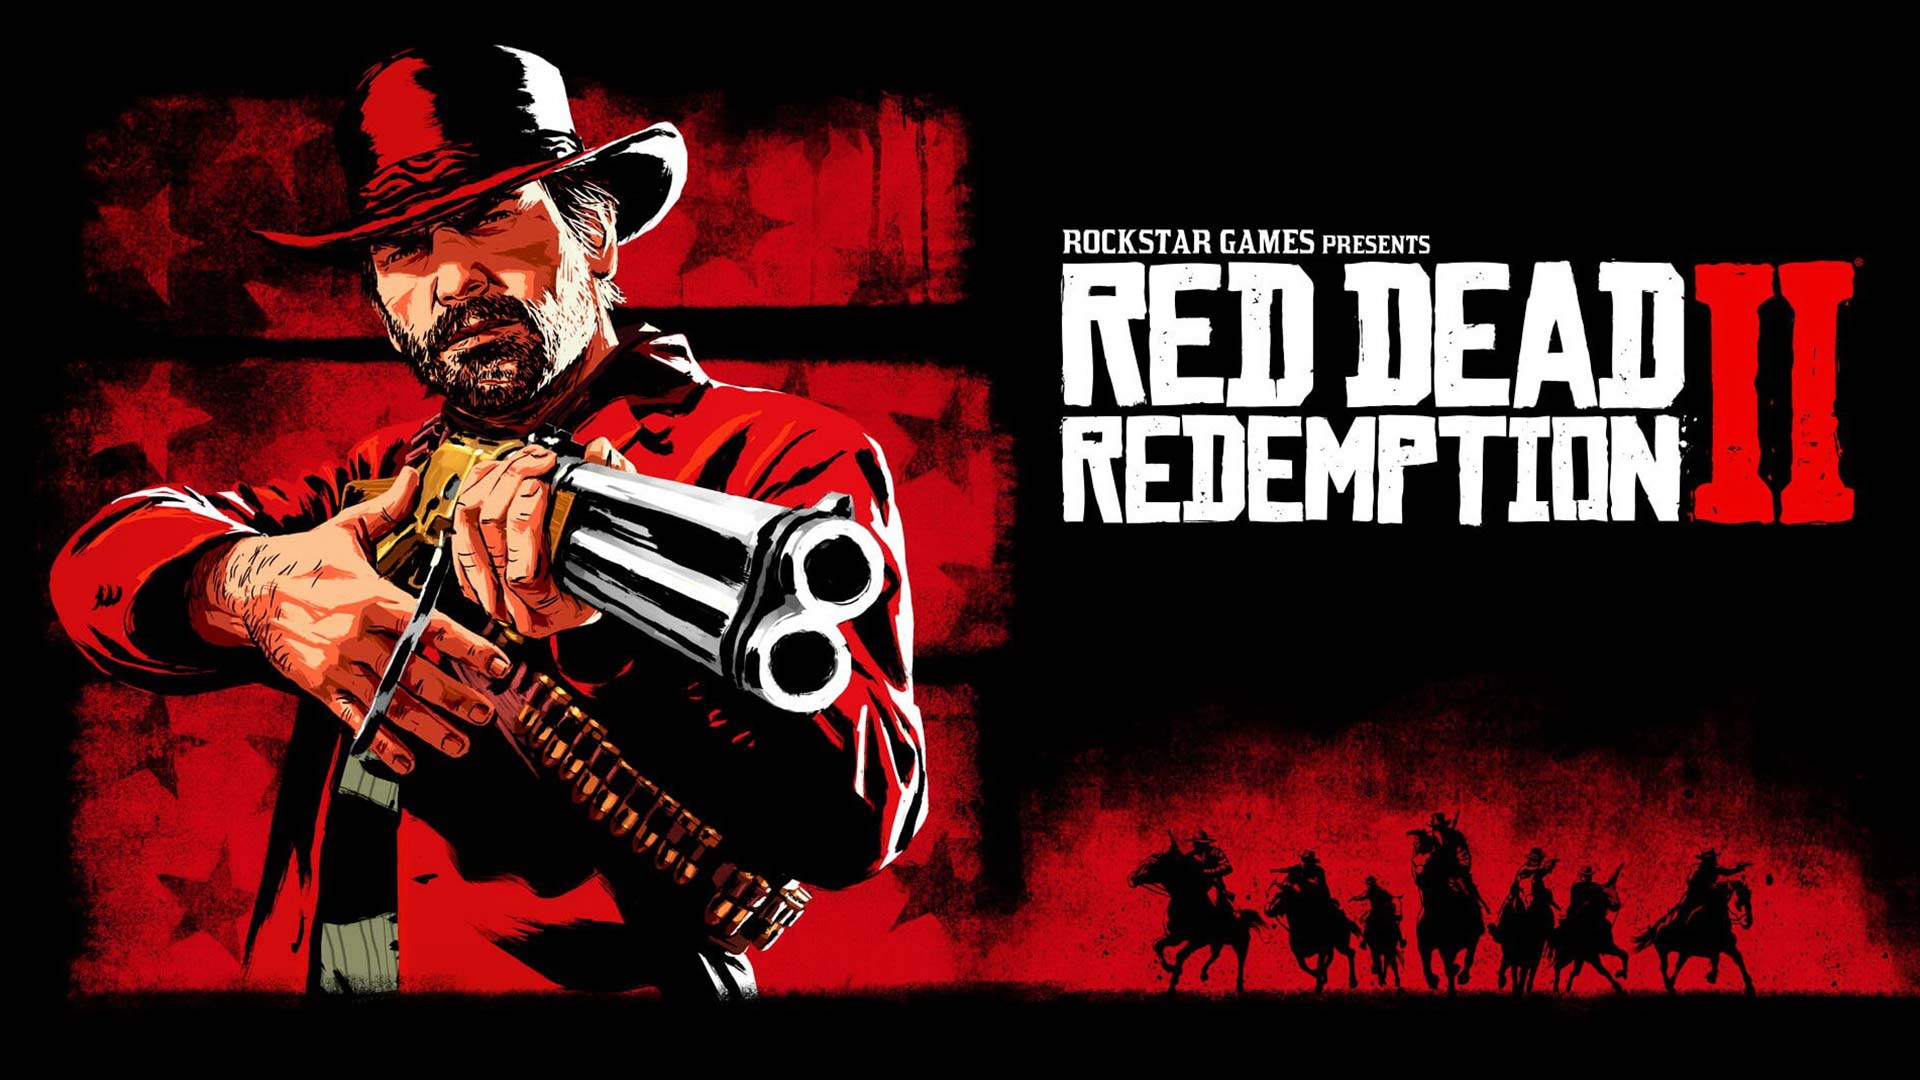 steam awards 2020 red dead redemption 2  Image of steam awards 2020 red dead redemption 2